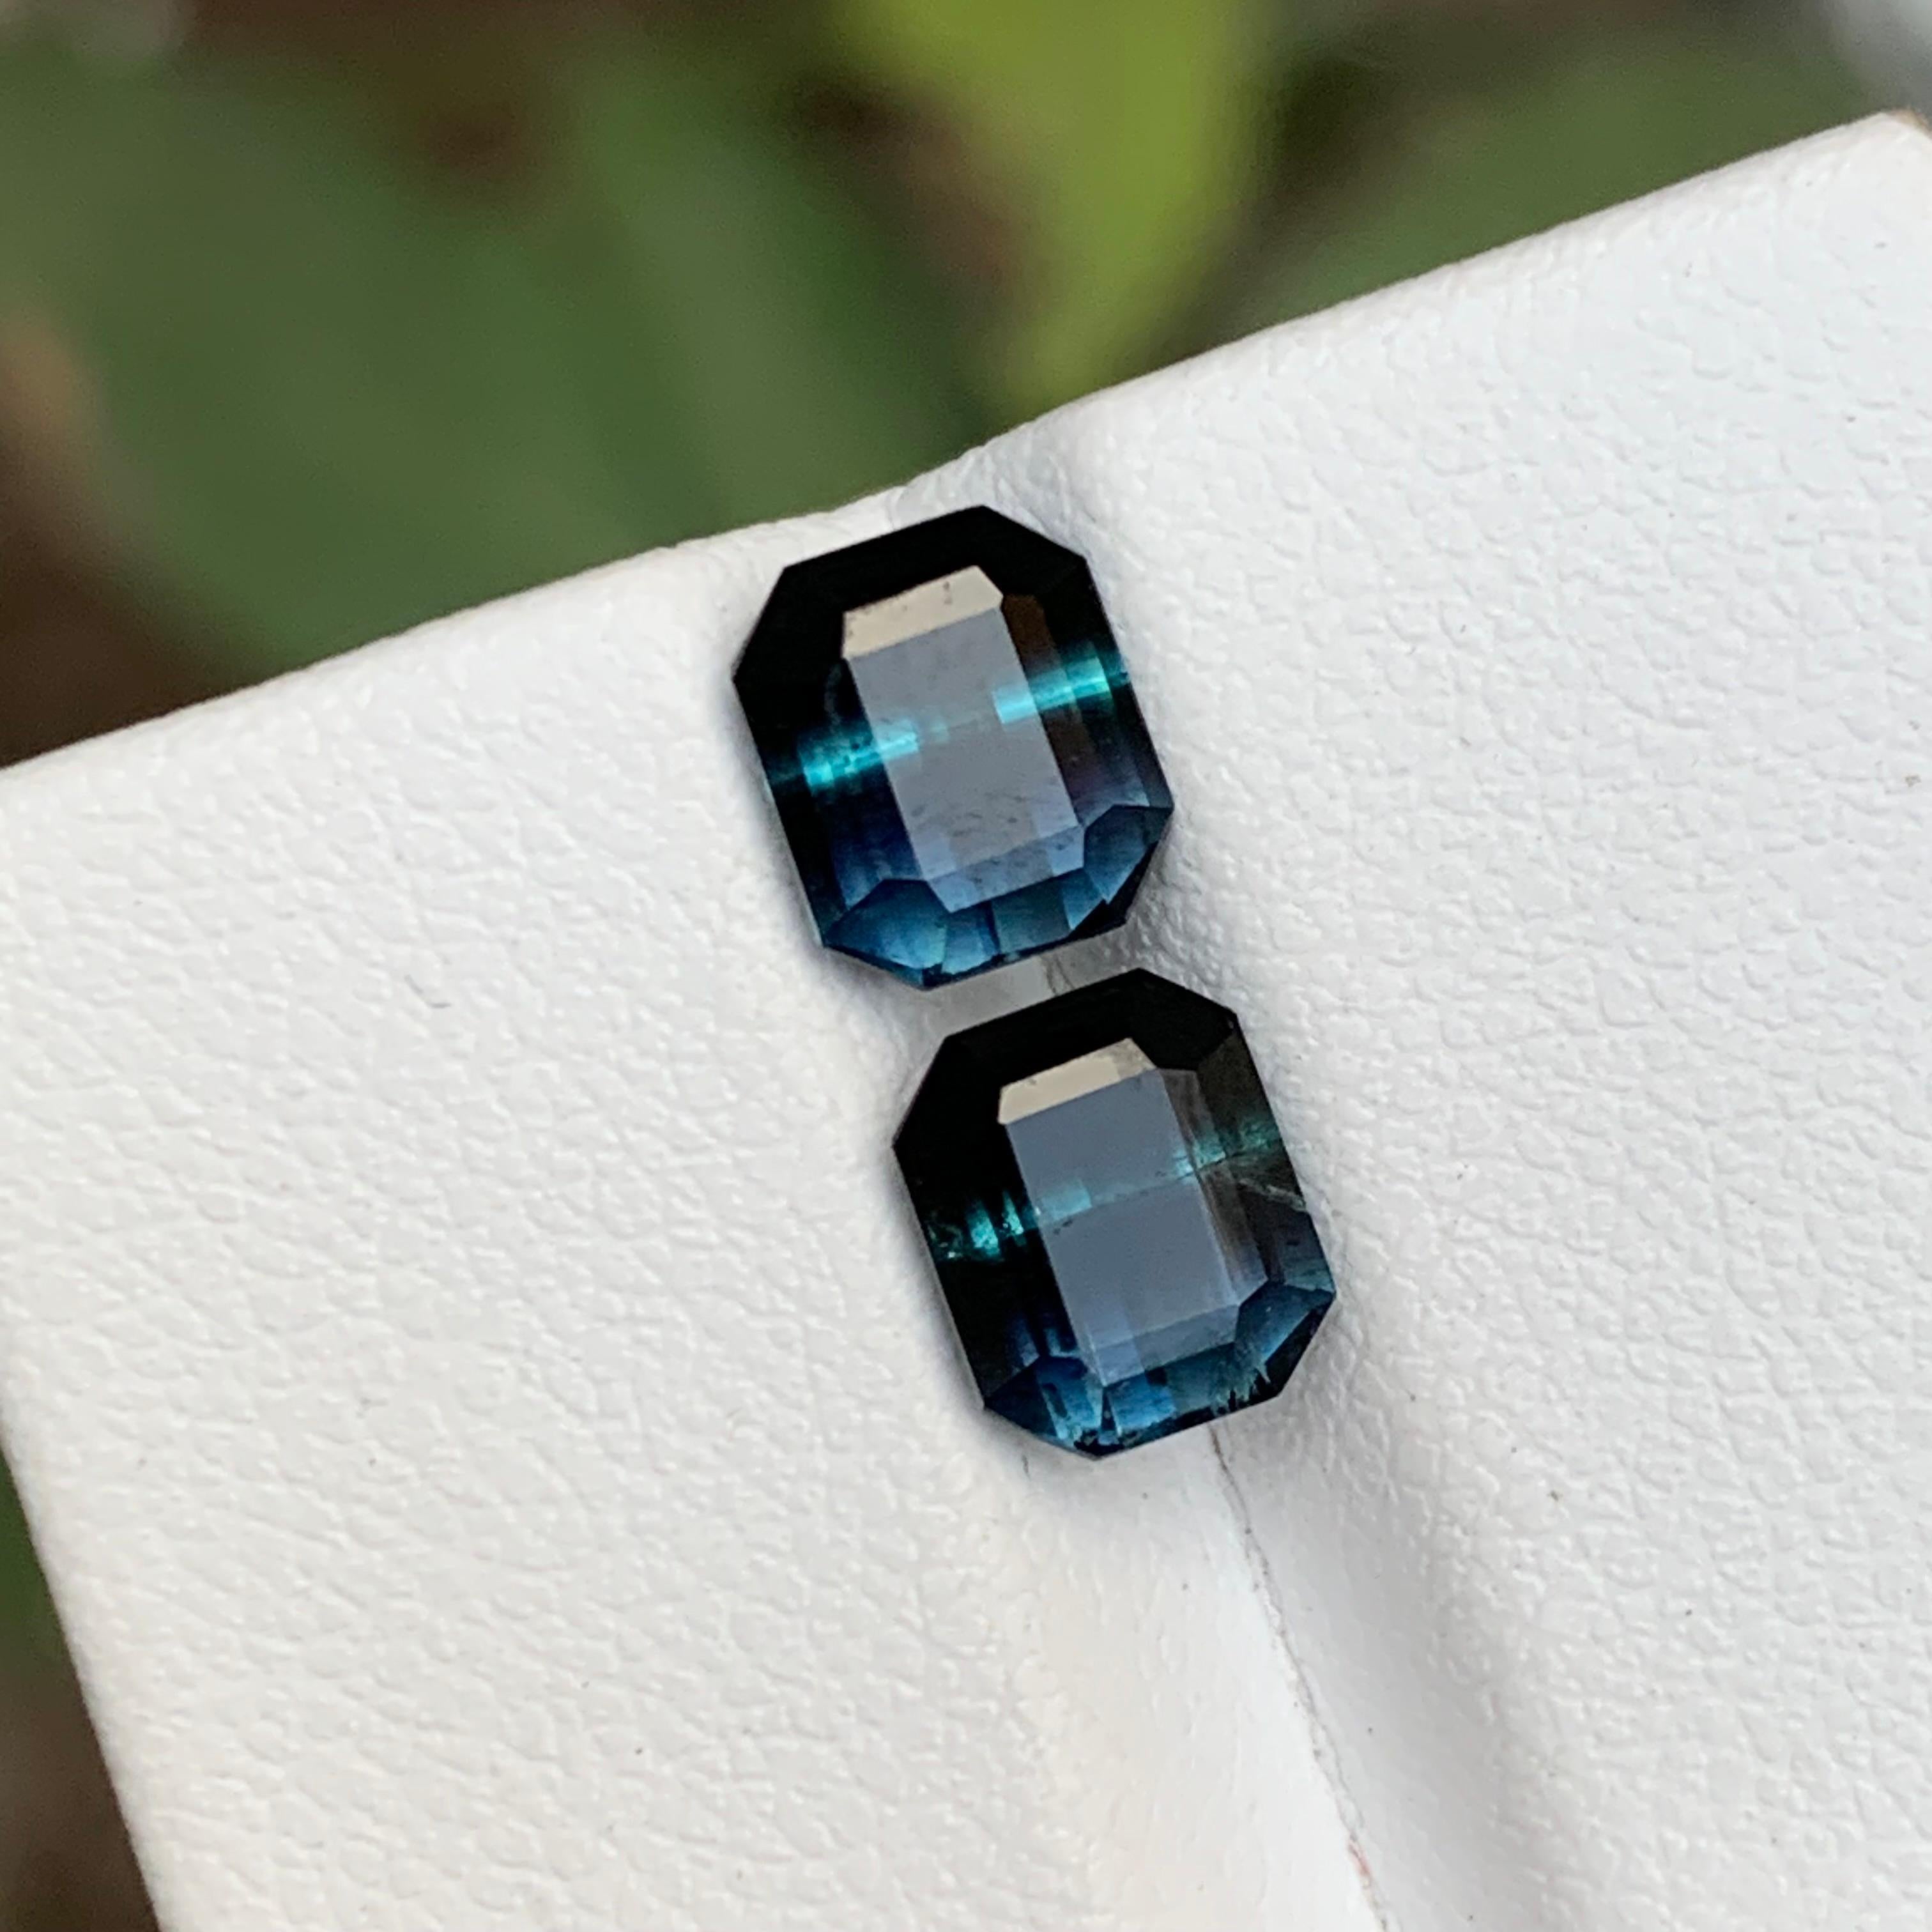 GEMSTONE TYPE: Tourmaline
PIECE(S): Pair
WEIGHT: 3.25 Carats
SHAPE: Emerald
SIZE (MM): 
1.60 Carat: 7.13 x 6.08 x 4.46
1.65 Carat: 7.13 x 5.92 x 4.58
COLOR: Bicolor Black and Blue
CLARITY: Slightly Included
TREATMENT: None
ORIGIN: